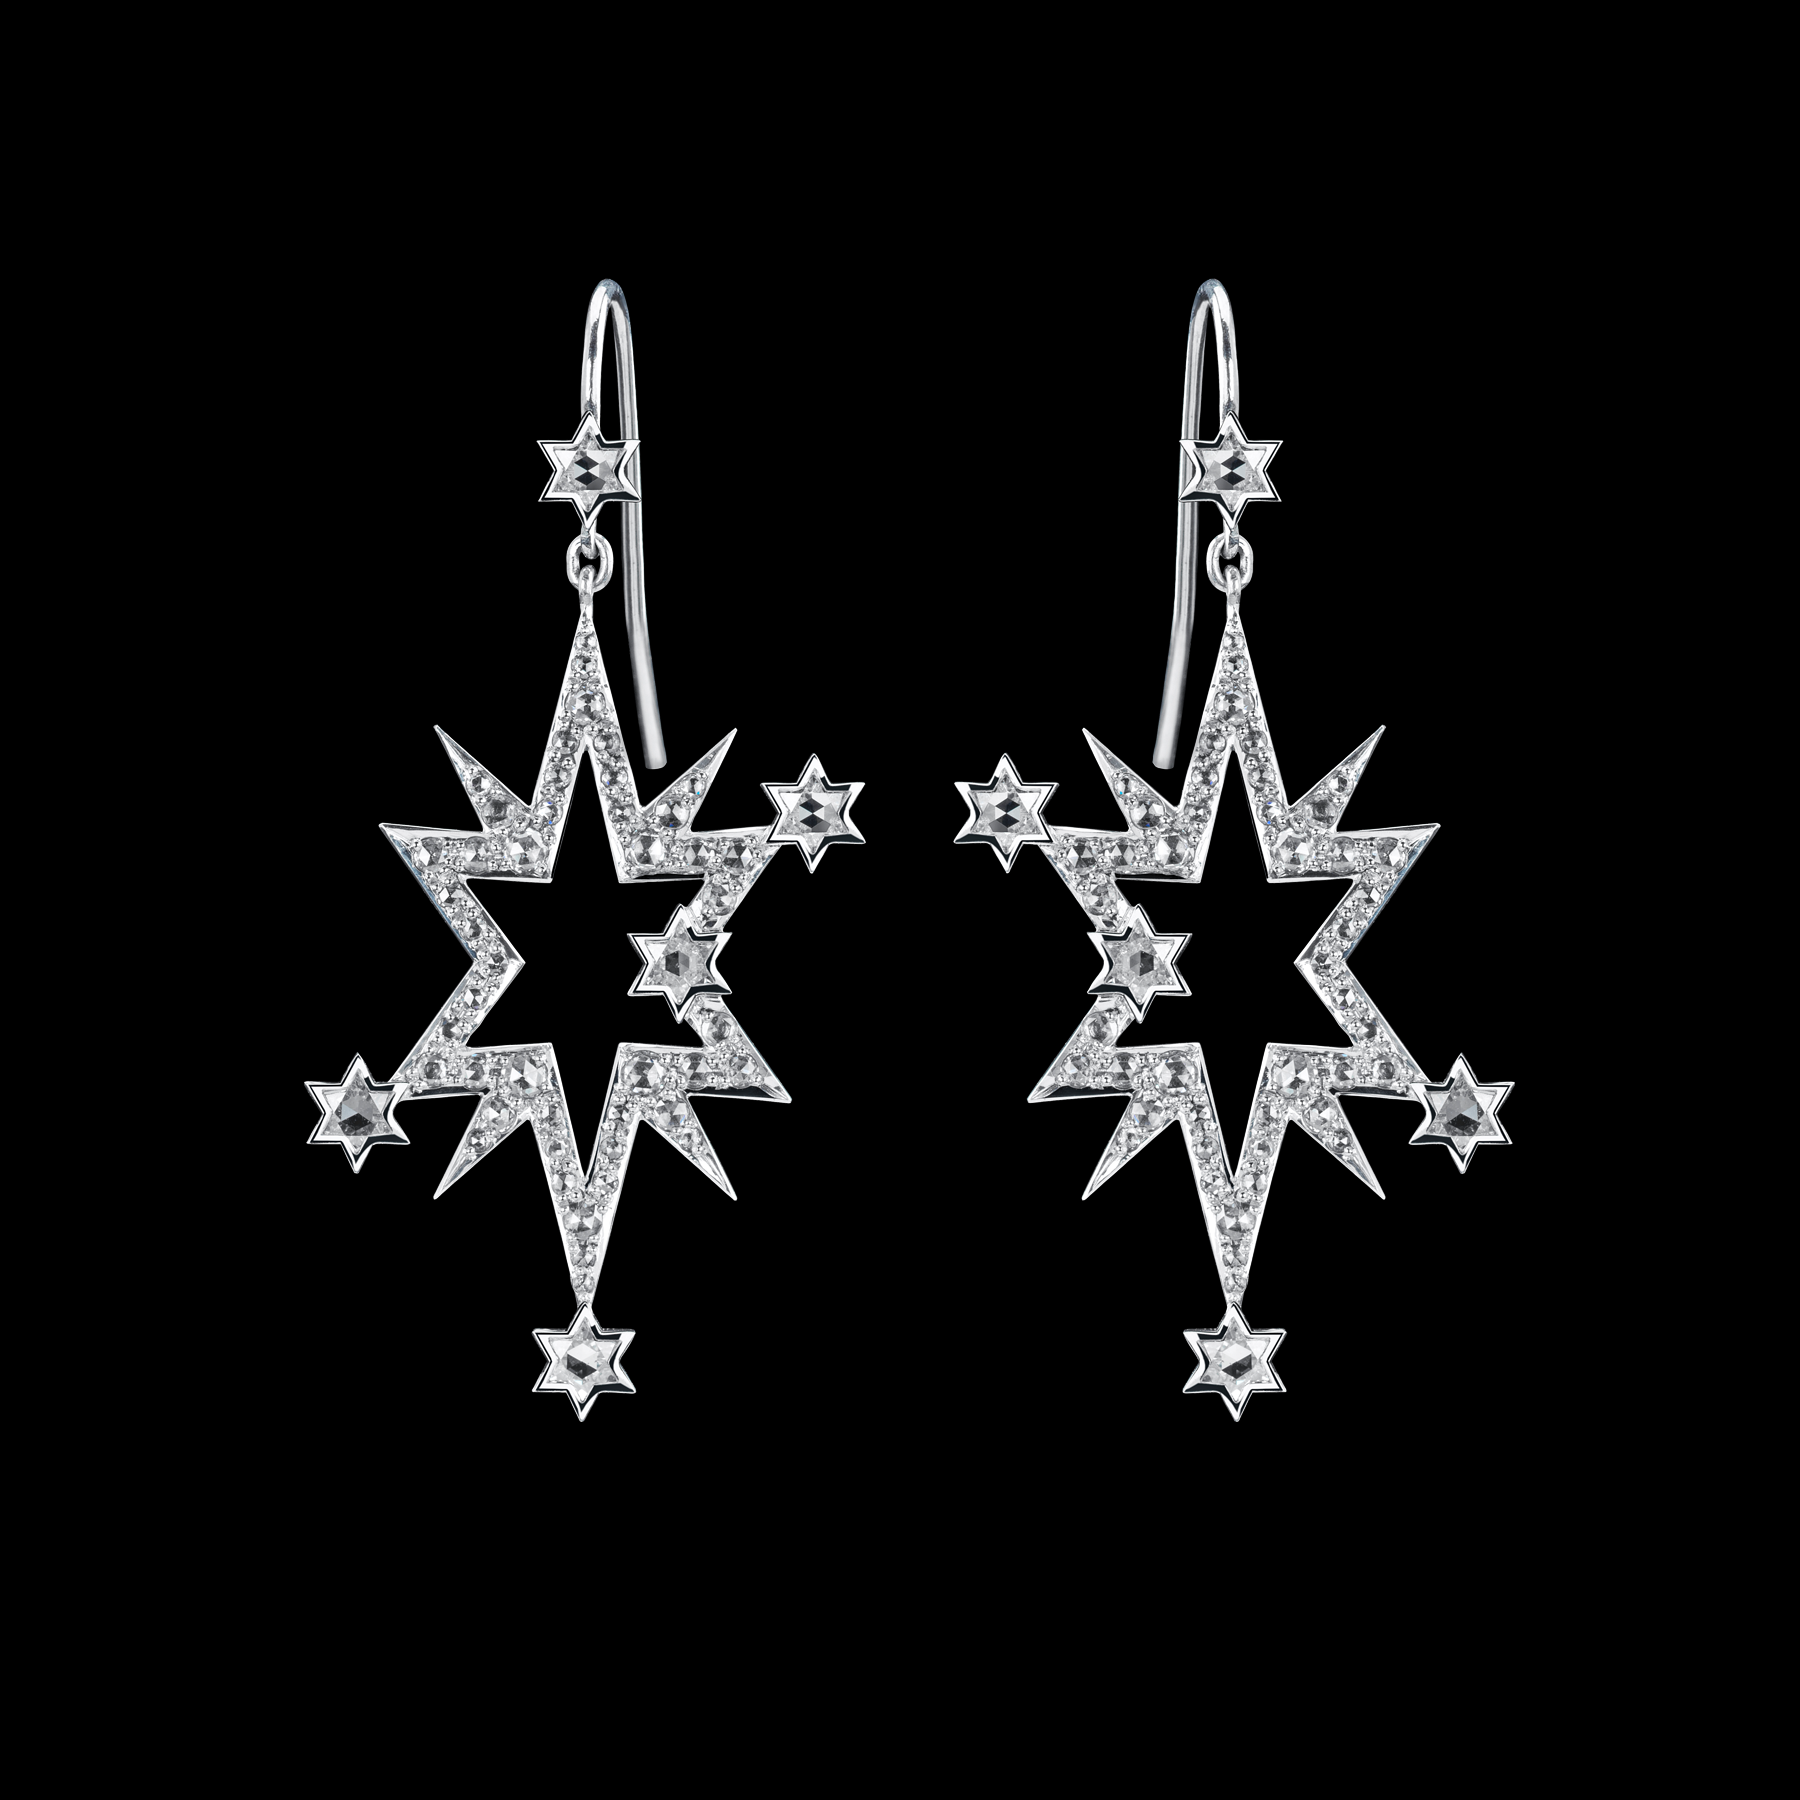 Aster Earrings by designer Solange Azagury-Partridge - 18k White Gold, star cut and rose cut diamonds - front view 